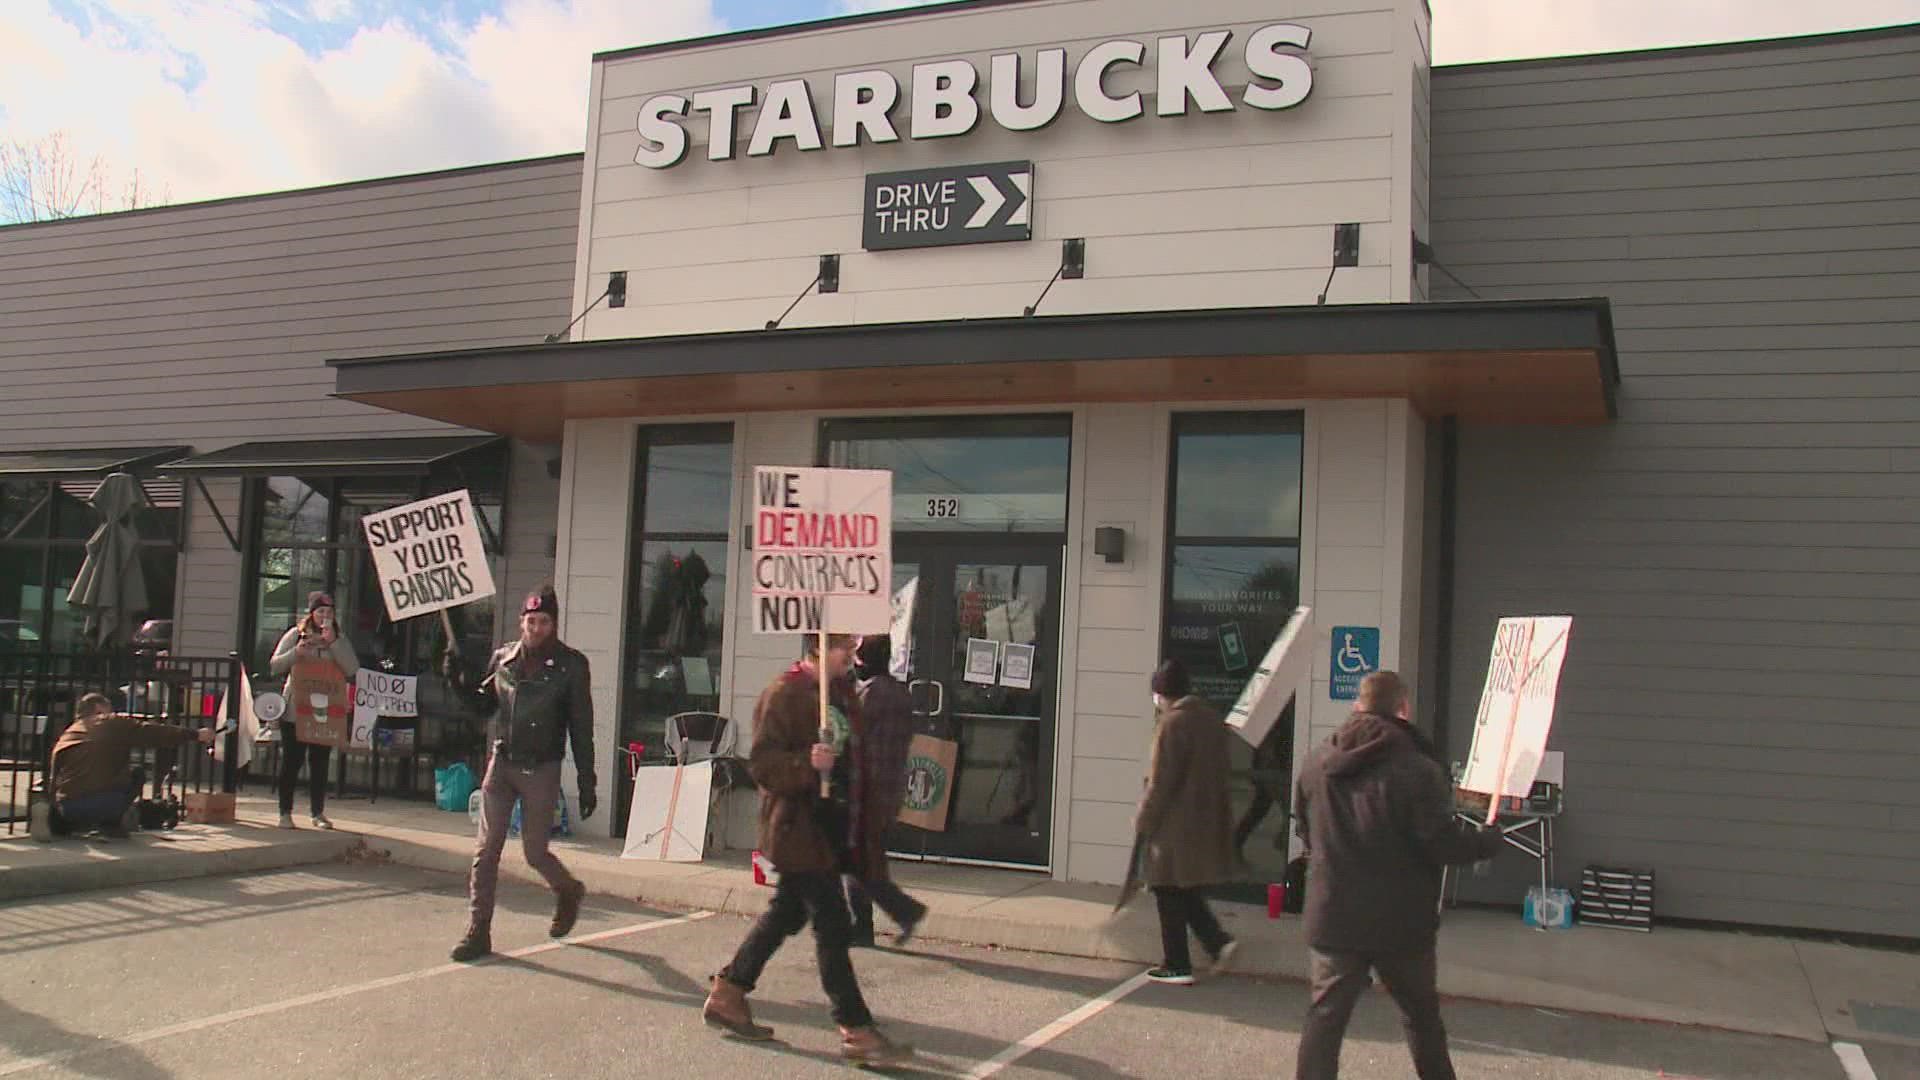 The movement comes amid one of Starbucks' busiest days of the year—Red Cup Day.